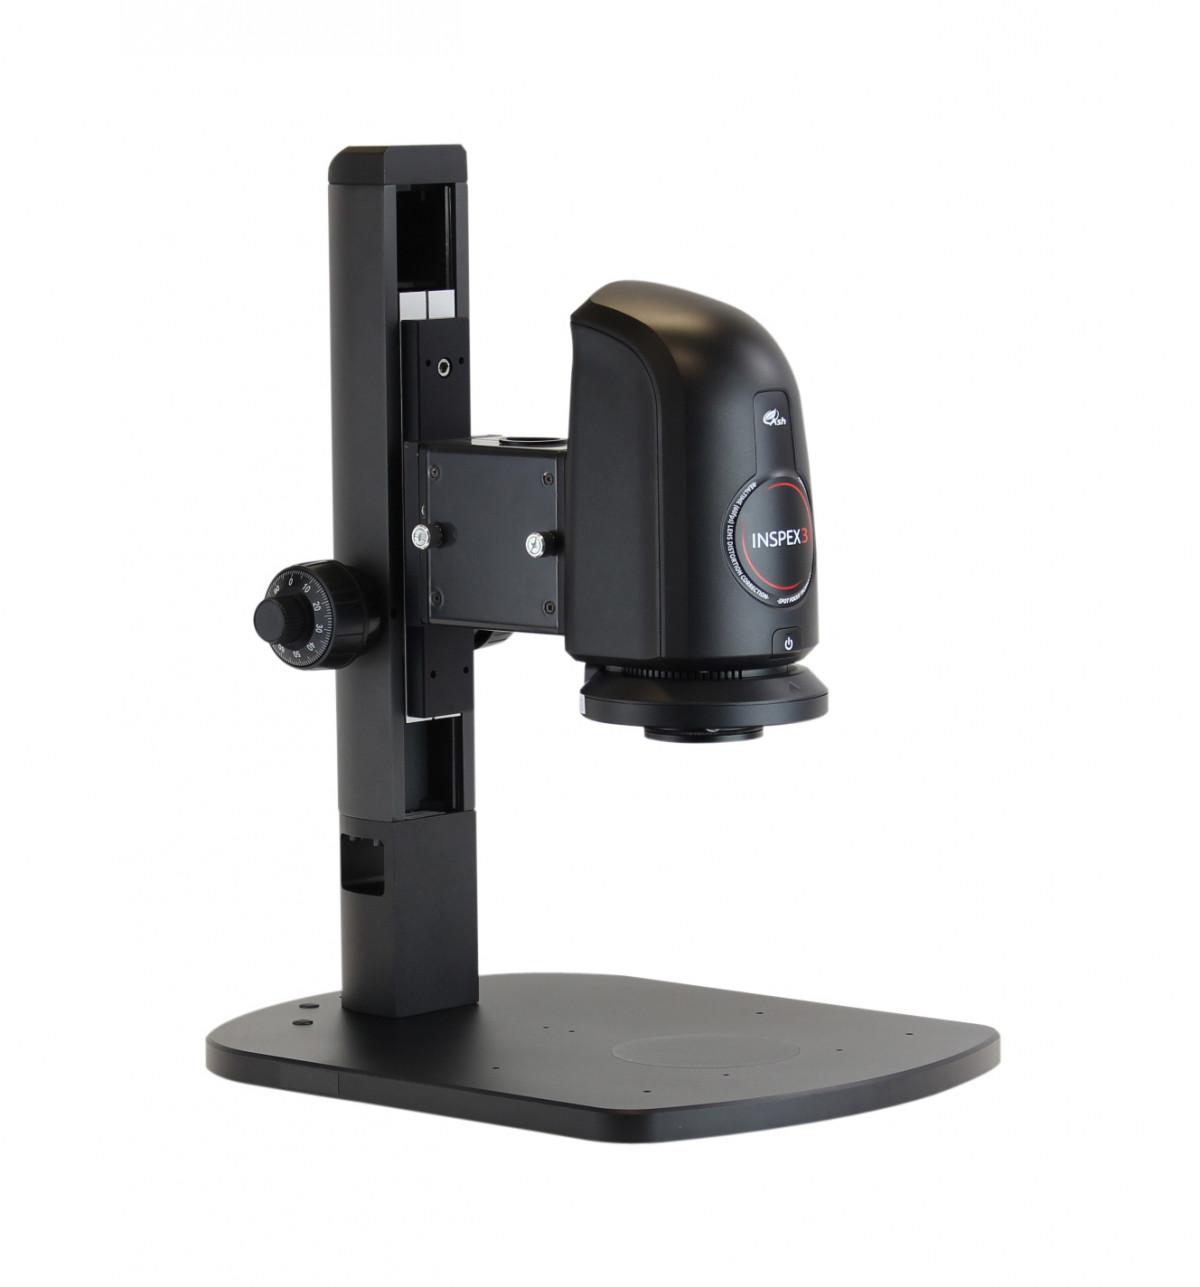 Inspex 3 Smart Inspection Digital Microscope with Premium Track Stand